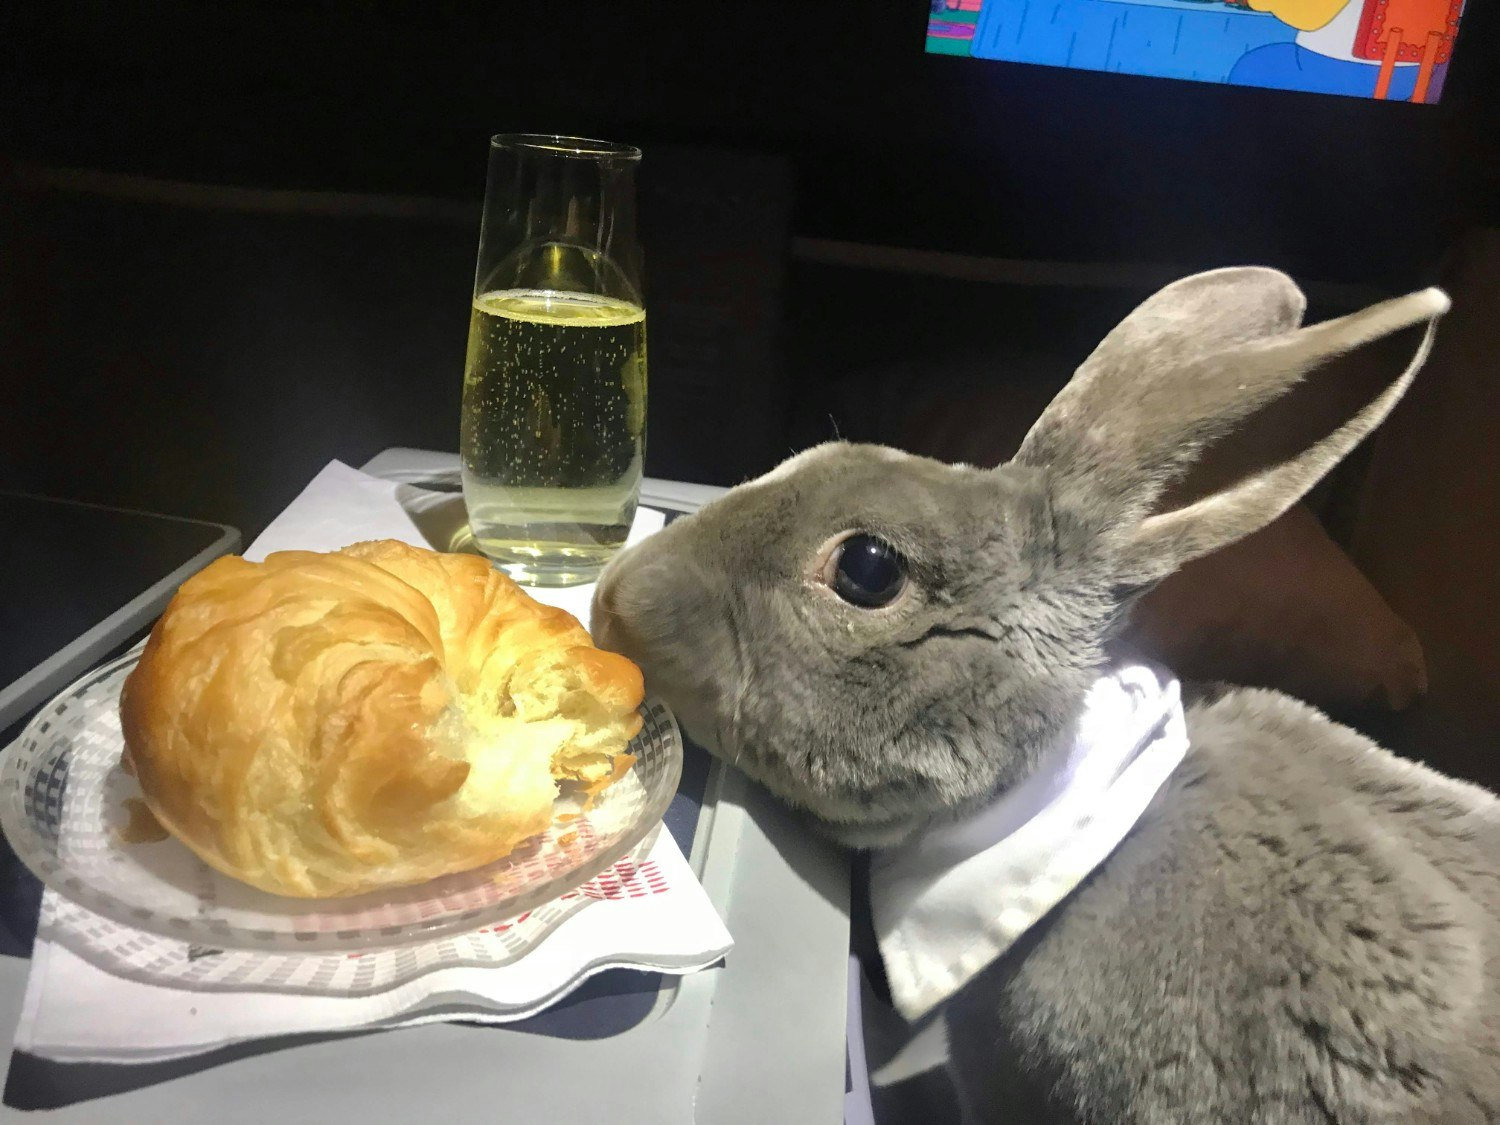 Coco the rabbit on an airplane seat with snacks